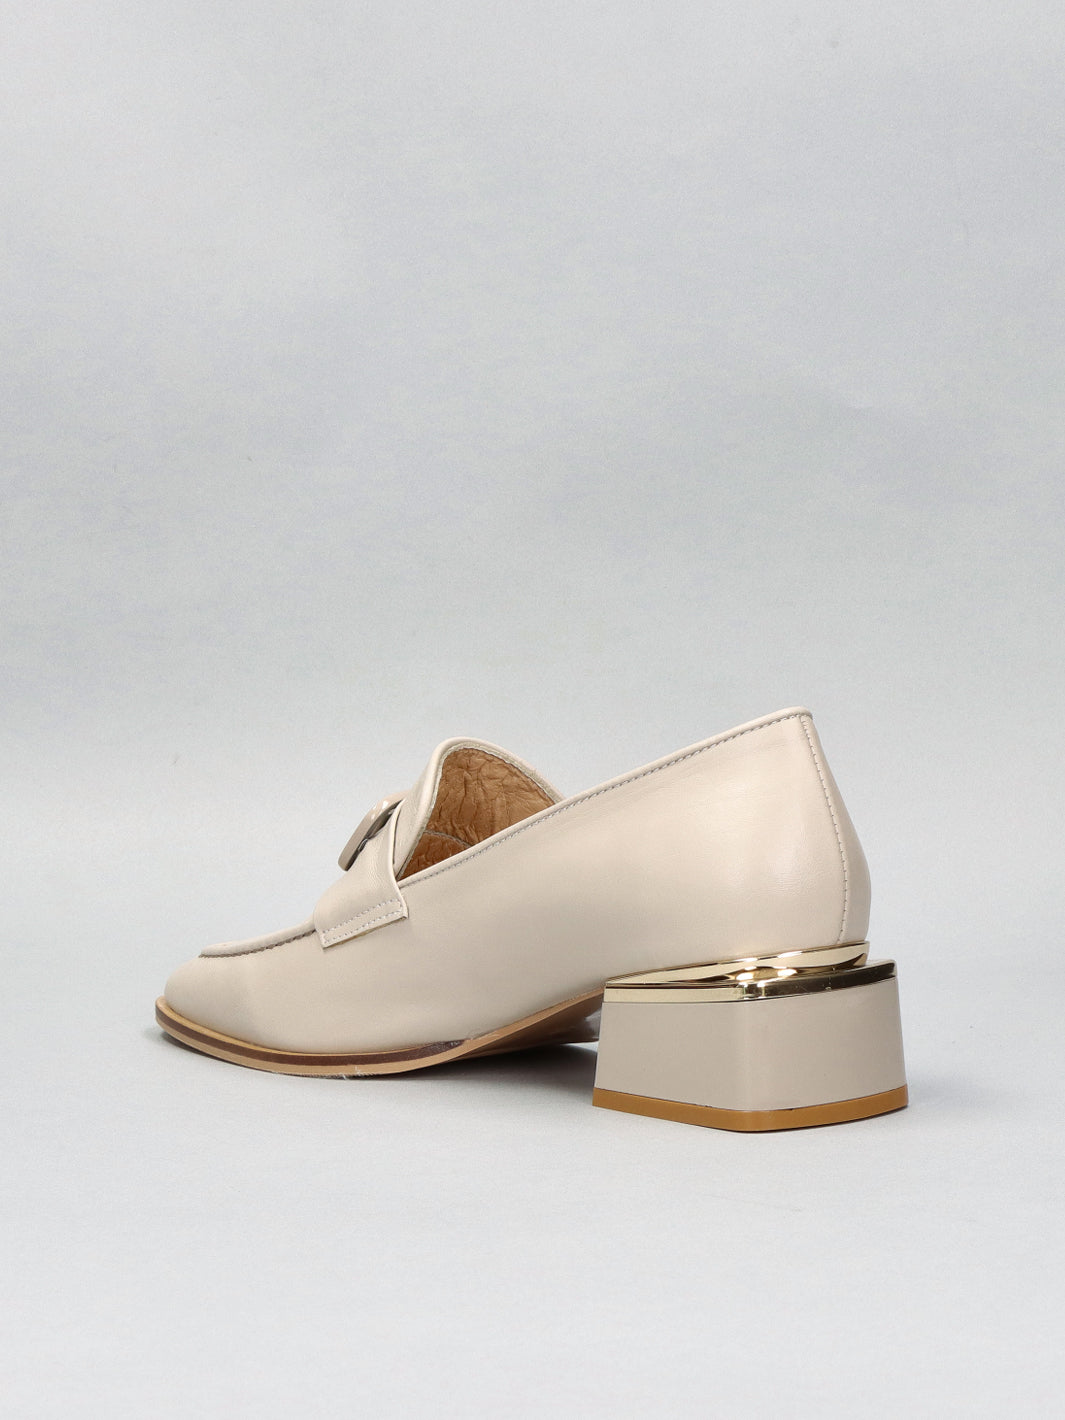 LEATHER LOW SHOES - BEIGE/BROWN